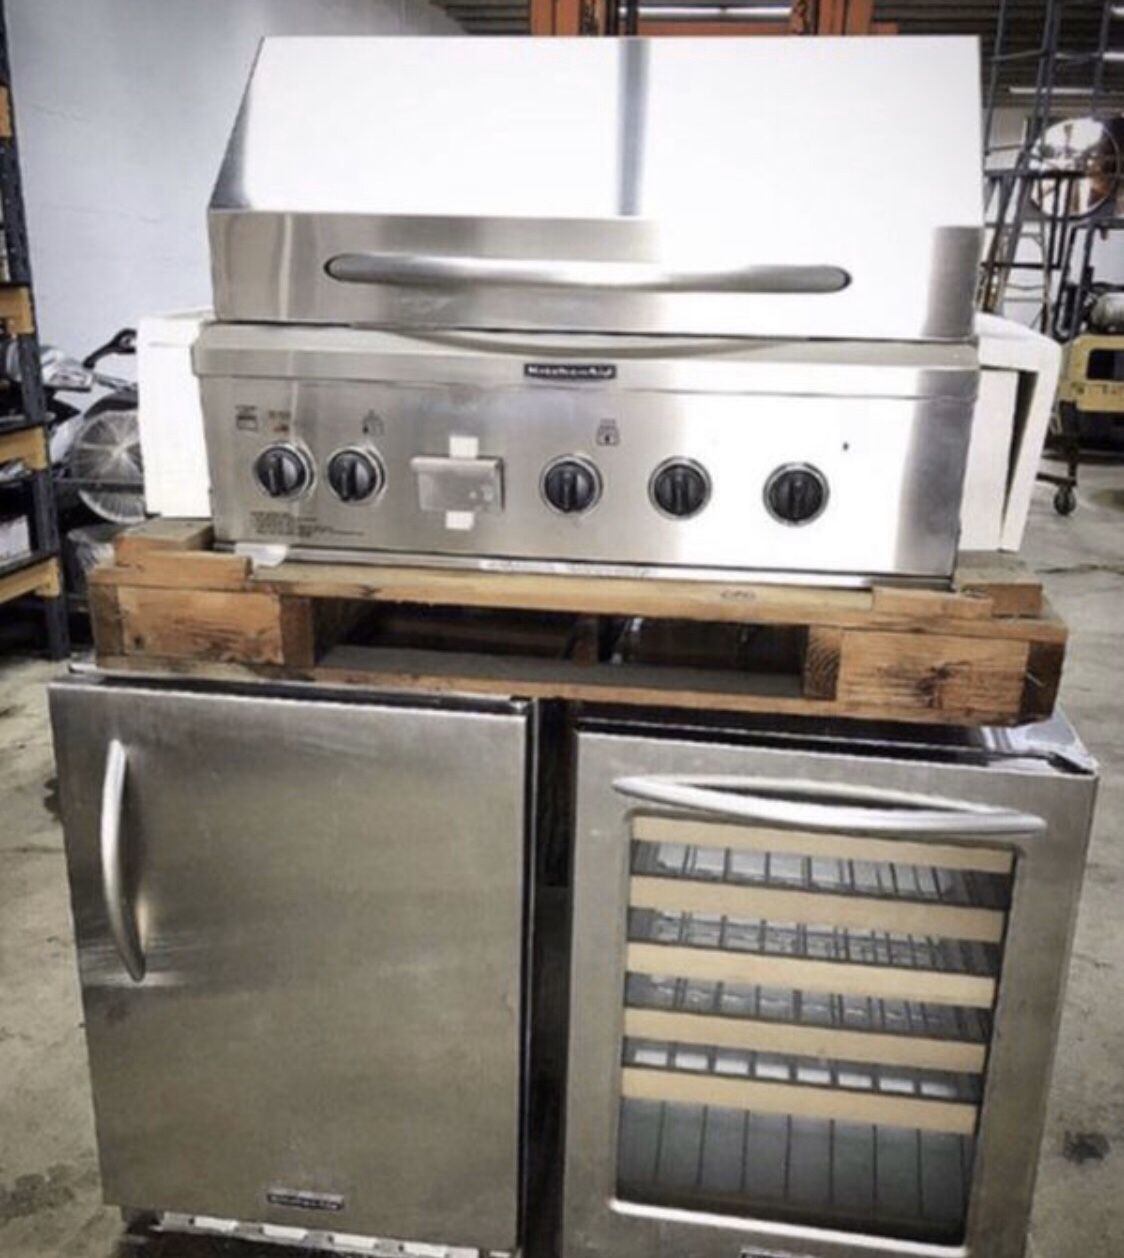 Complete Brand New Stainless Steel Outdoor KitchenAid set. 36" BBQ Grill, Refrigerator, Wine Cooler.